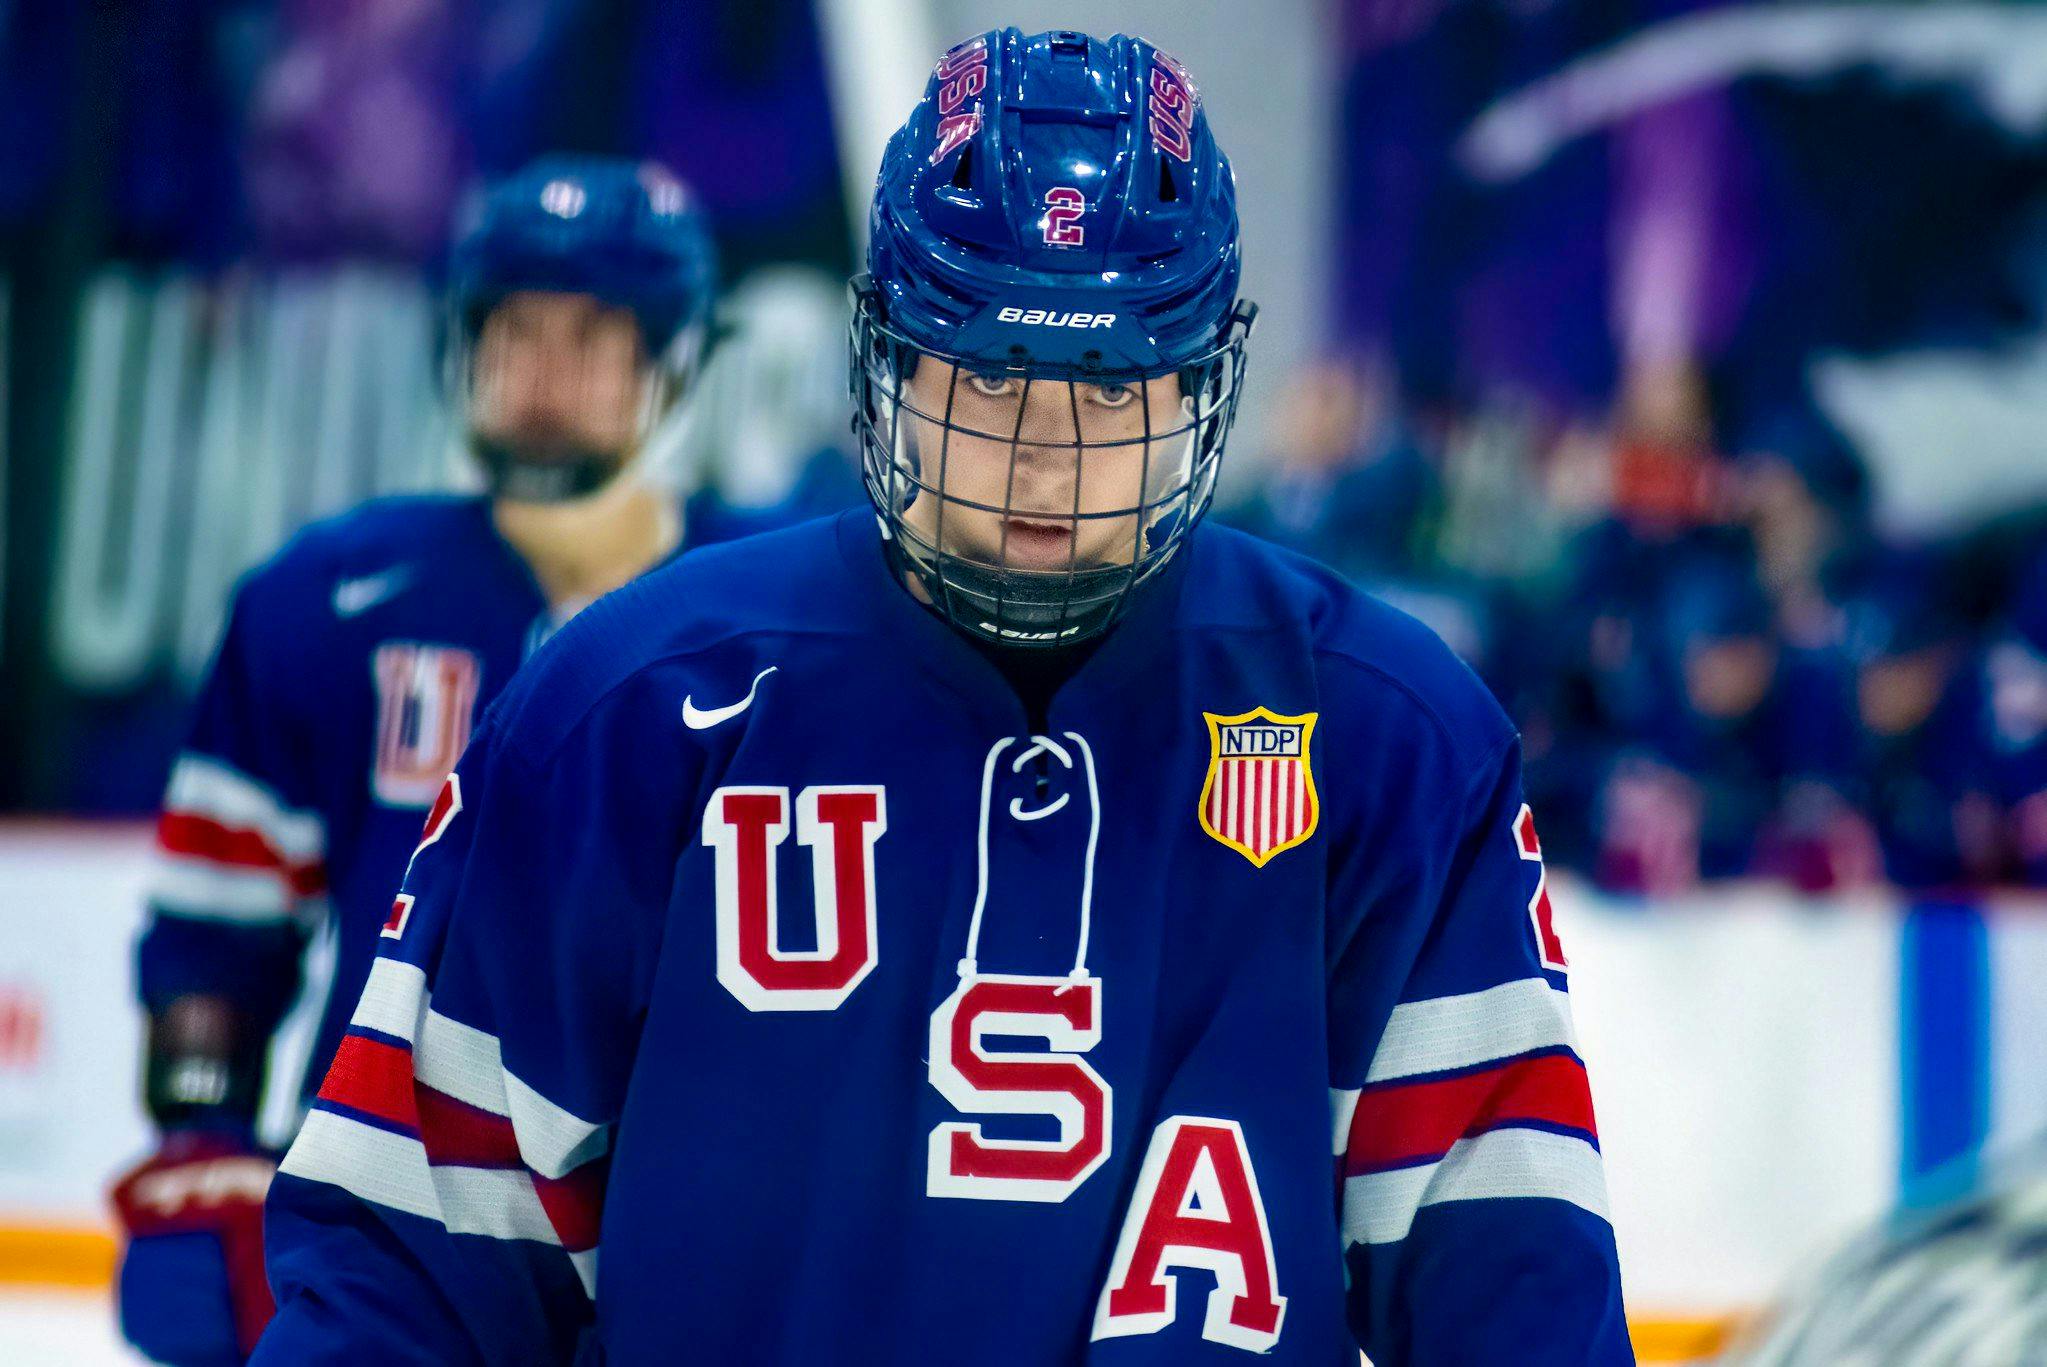 2023 NHL Draft prospect Will Smith has everything teams want Daily